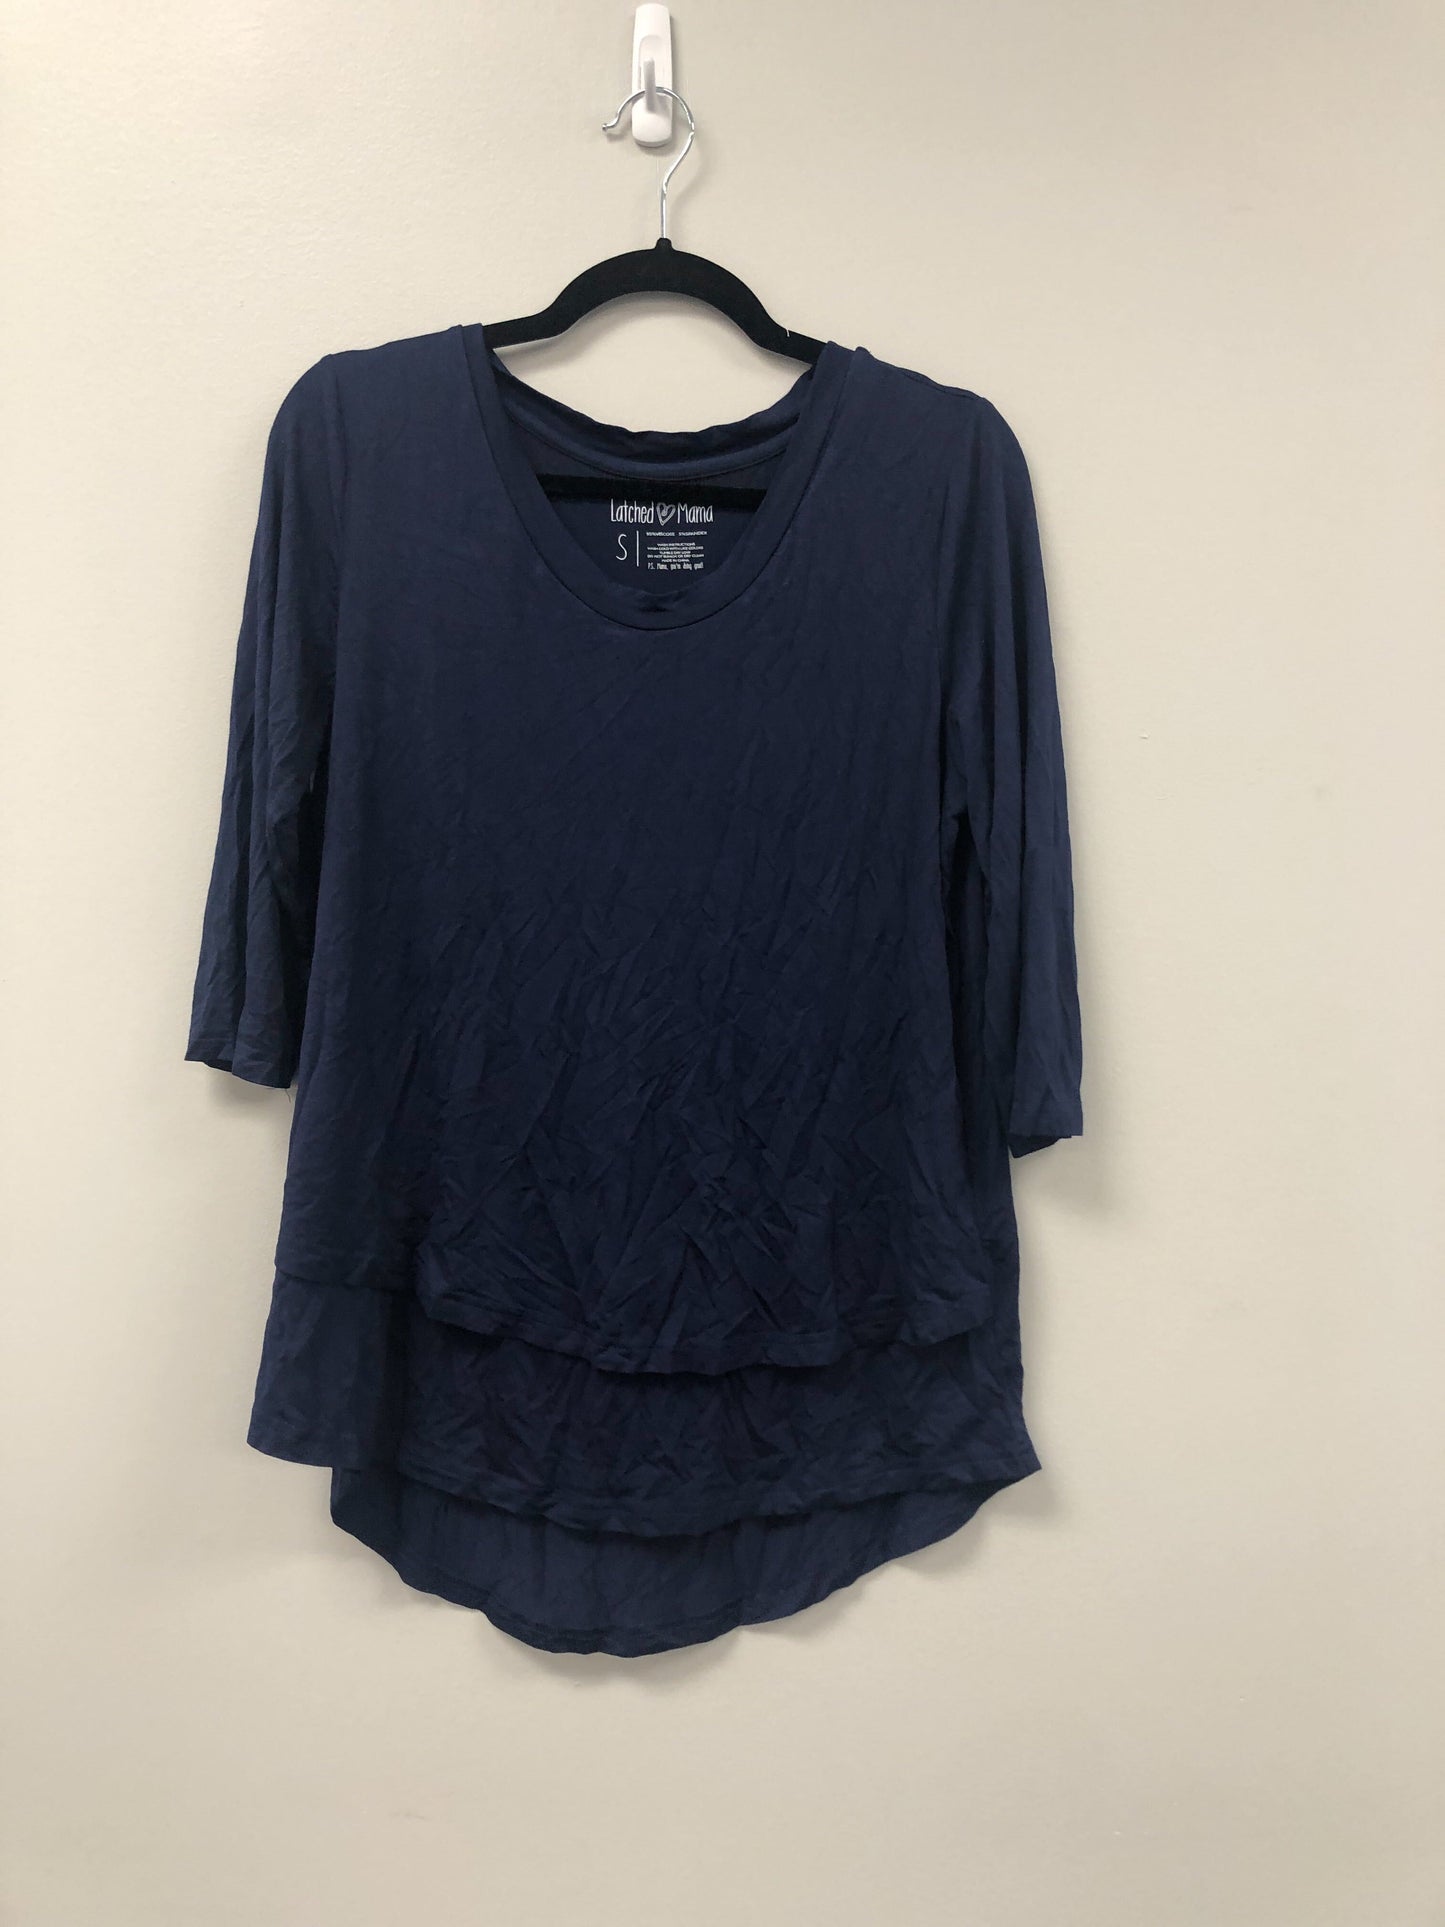 Outlet 5558 - Latched Mama 3/4 Sleeve Scoop Neck Nursing Top 2.0 - Navy - Small